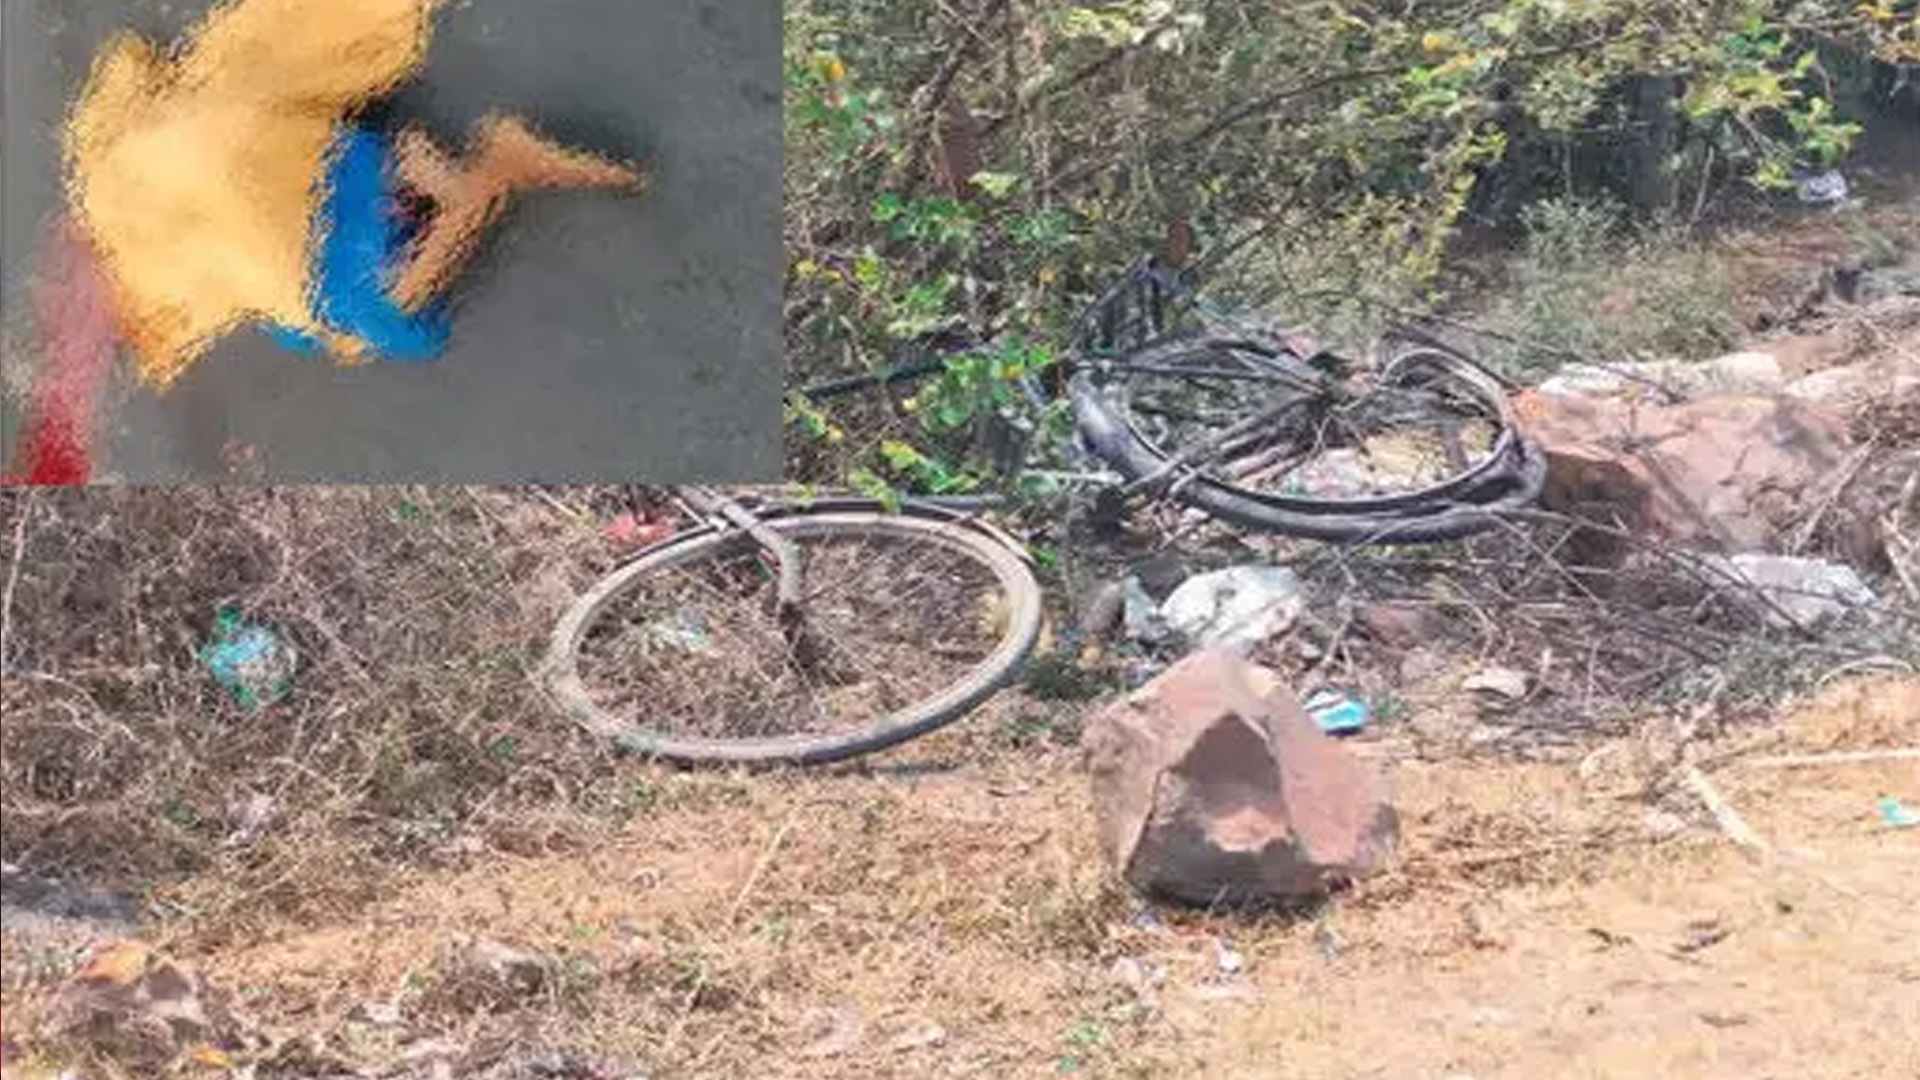 Bicycle crushed by speeding vehicle, wife dead and husband injured